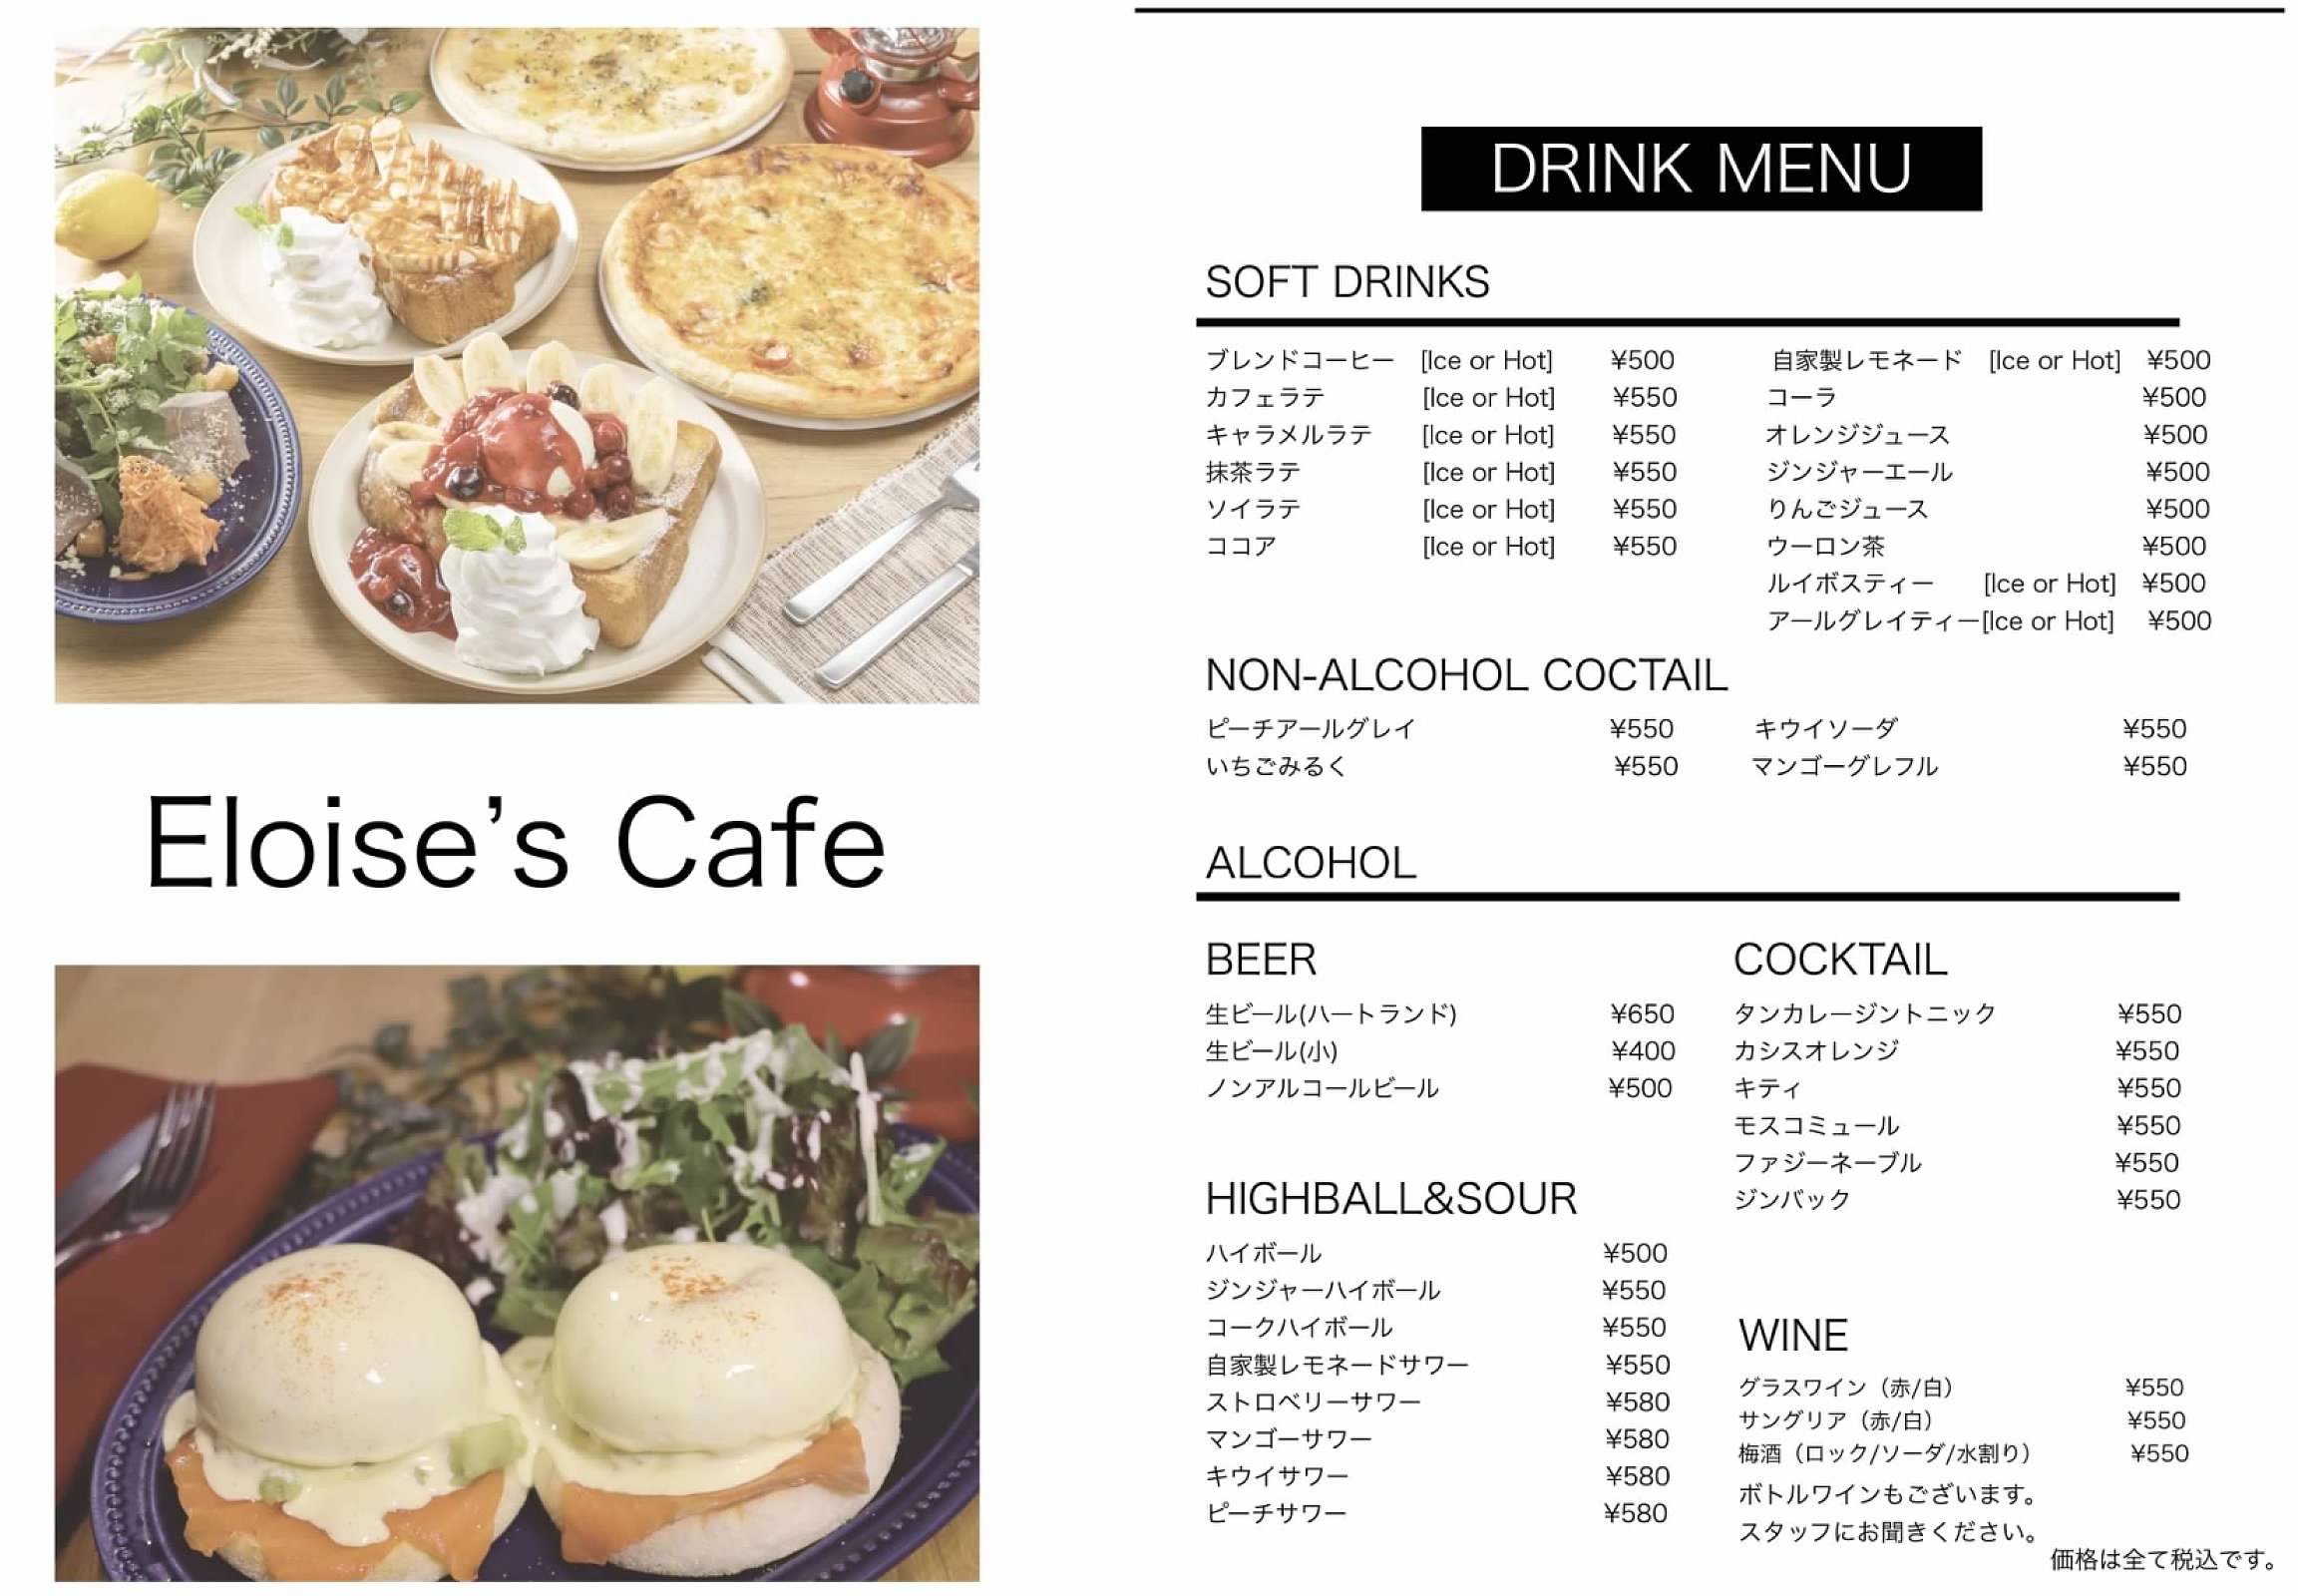 “-himydream-ELOISE’s Cafe ELOISE’s Cafe 名古屋必吃早午餐 抹茶甜點/下午茶推薦 レイヤード久屋大通公園店 -名古屋必吃早午餐 -名古屋必吃早午餐-名古屋午餐-名古屋早午餐-名古屋抹茶 -名古屋冰淇淋-名古屋餐廳-名古屋聚餐-名古屋咖啡店-名古屋早餐-名古屋網美餐廳-